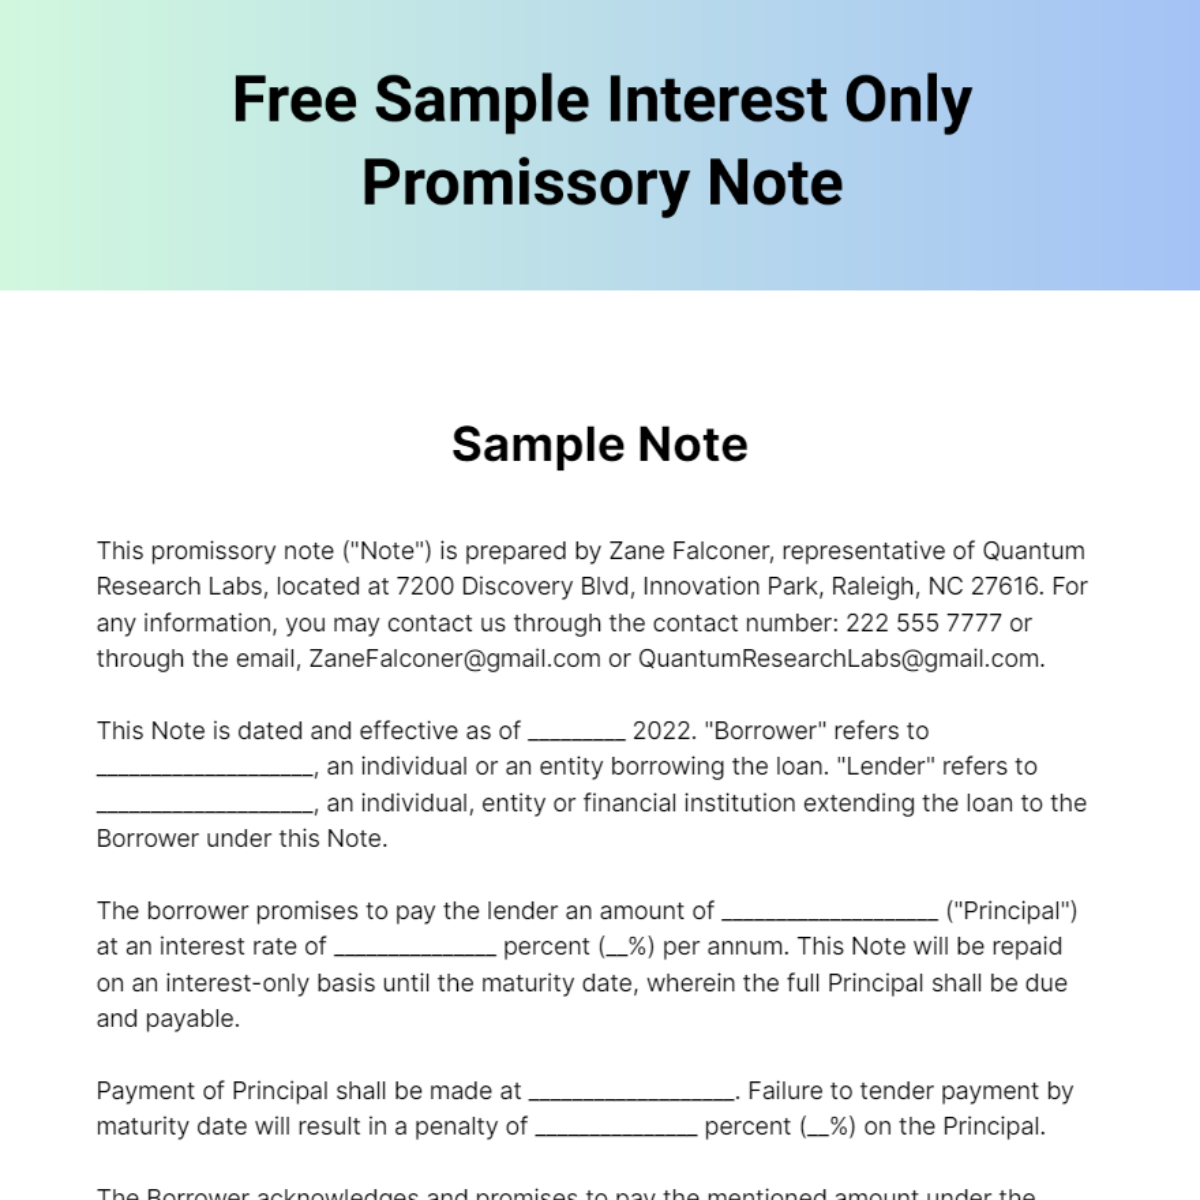 Sample Interest Only Promissory Note Template